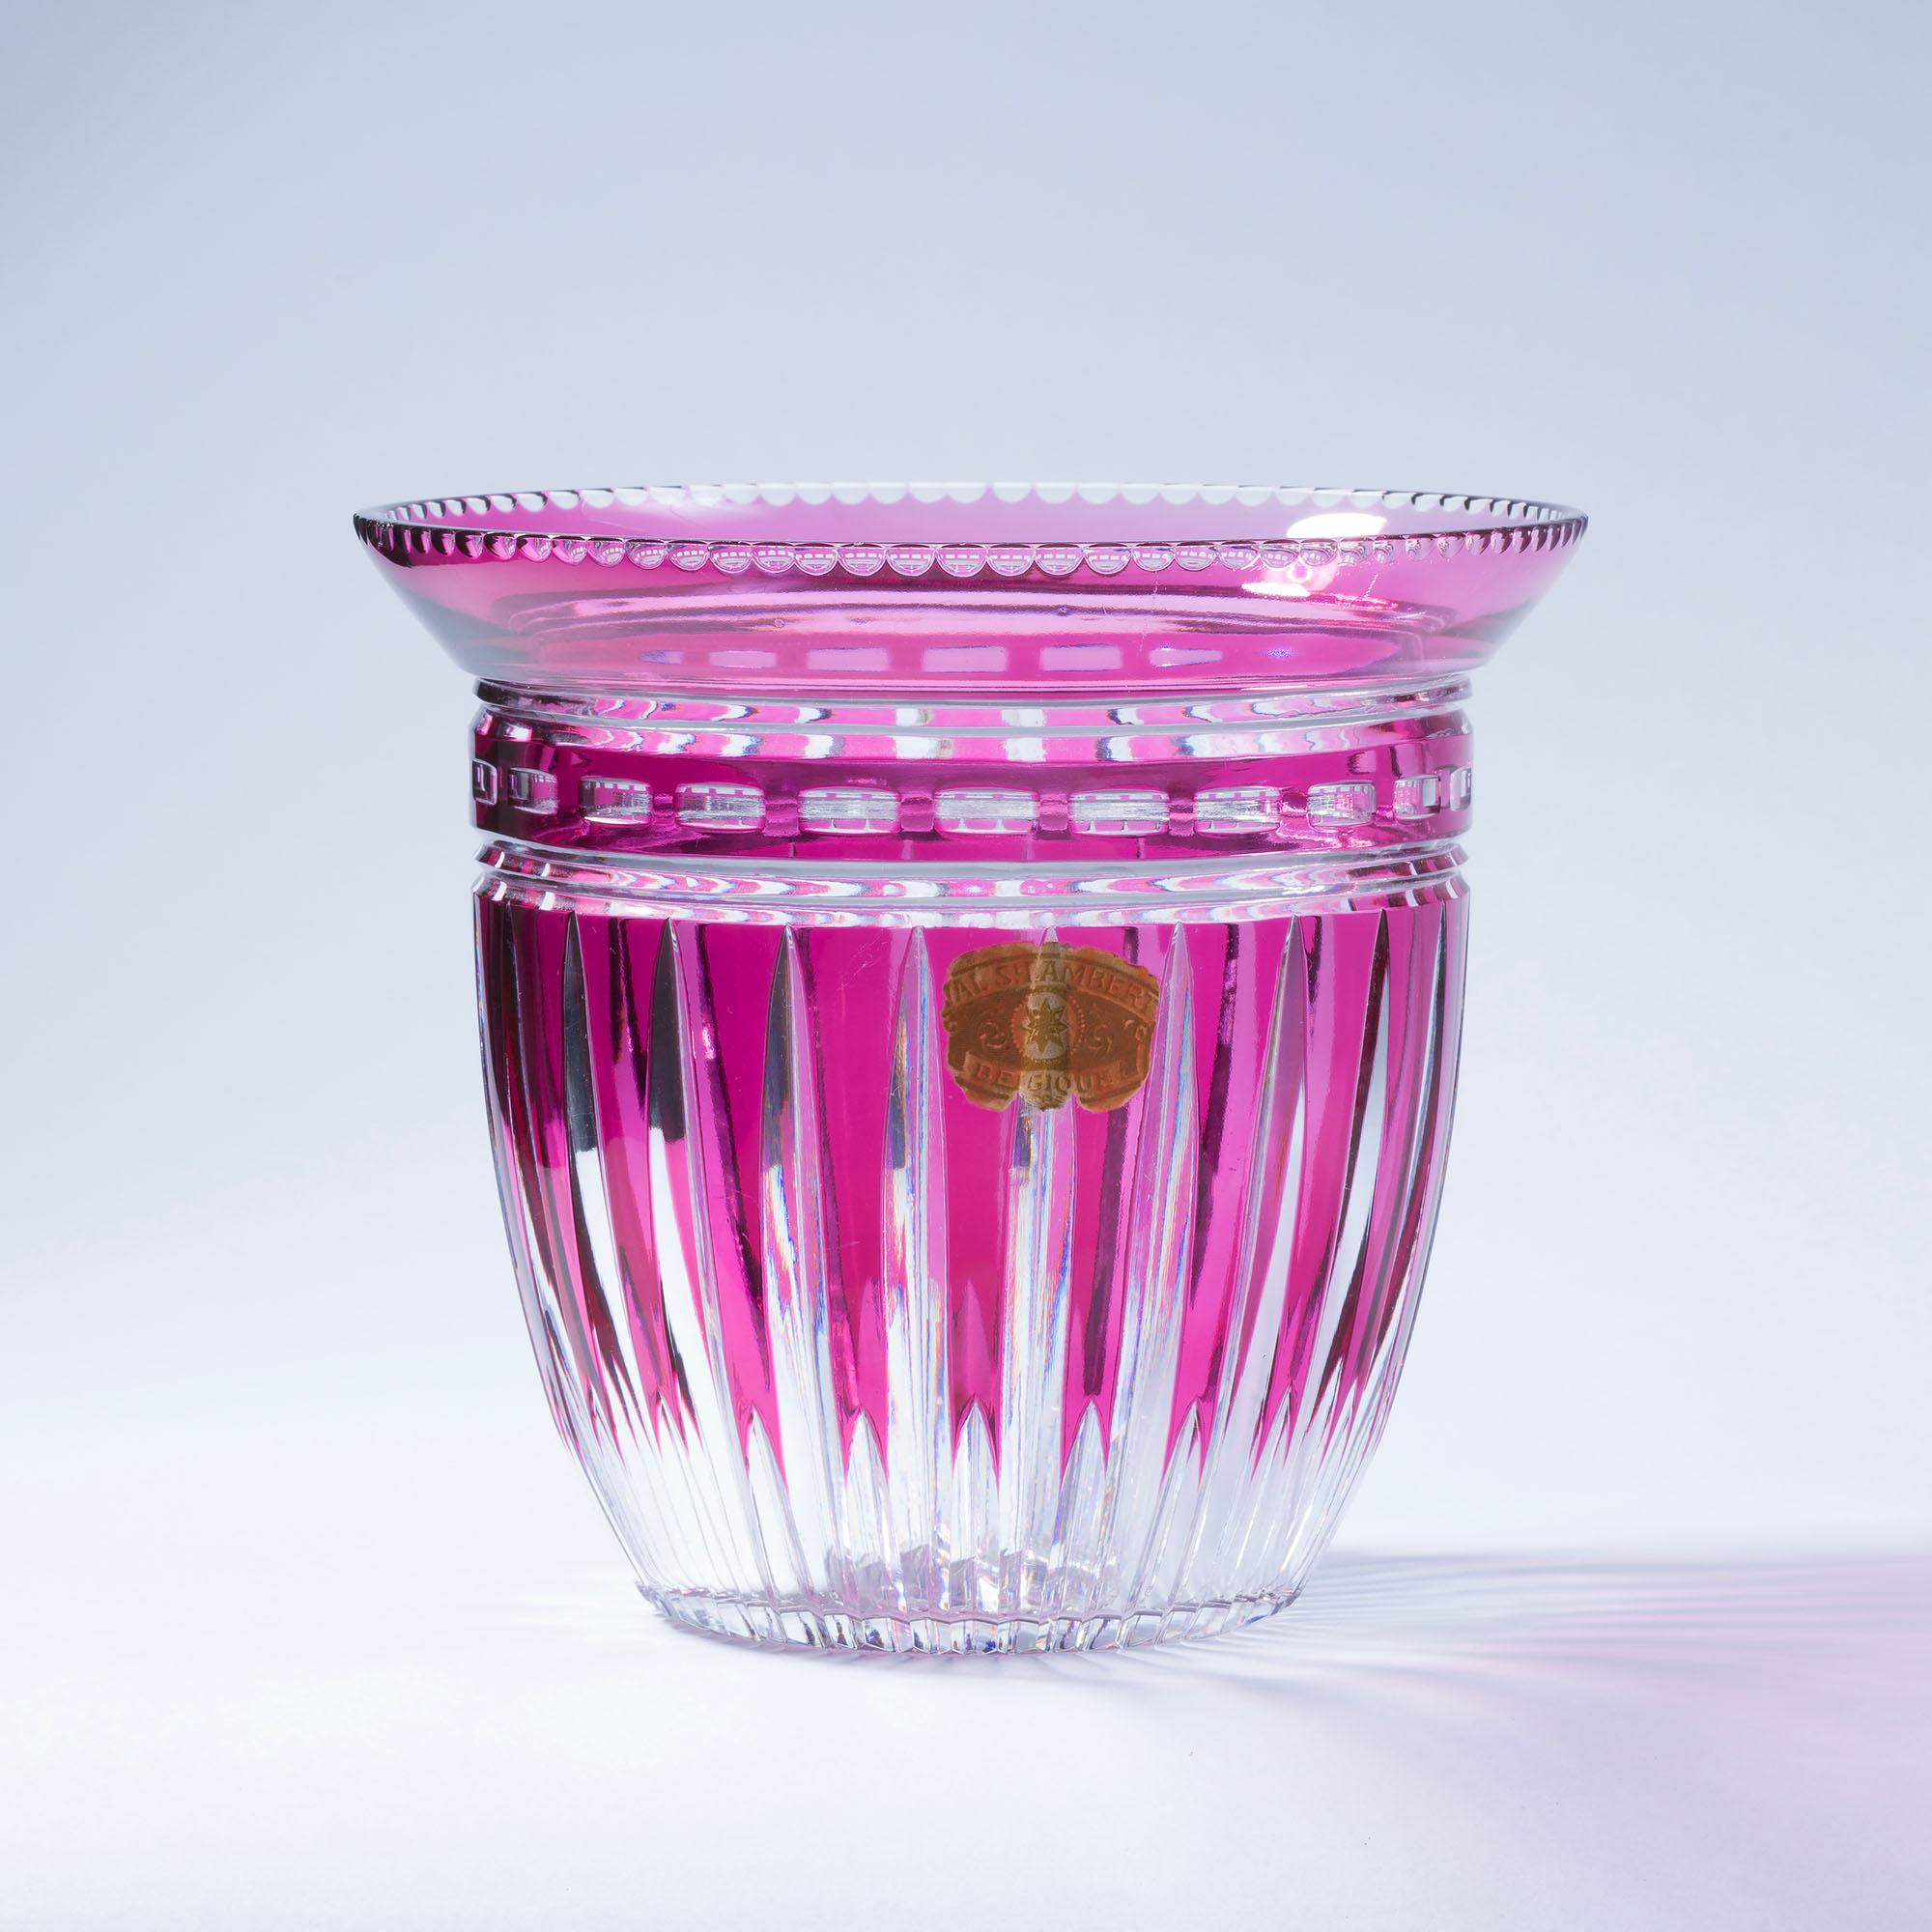 Val Saint Lambert 'Palacio' Ruby Over Uranium Yellow Cut Glass Vase In Excellent Condition For Sale In London, by appointment only